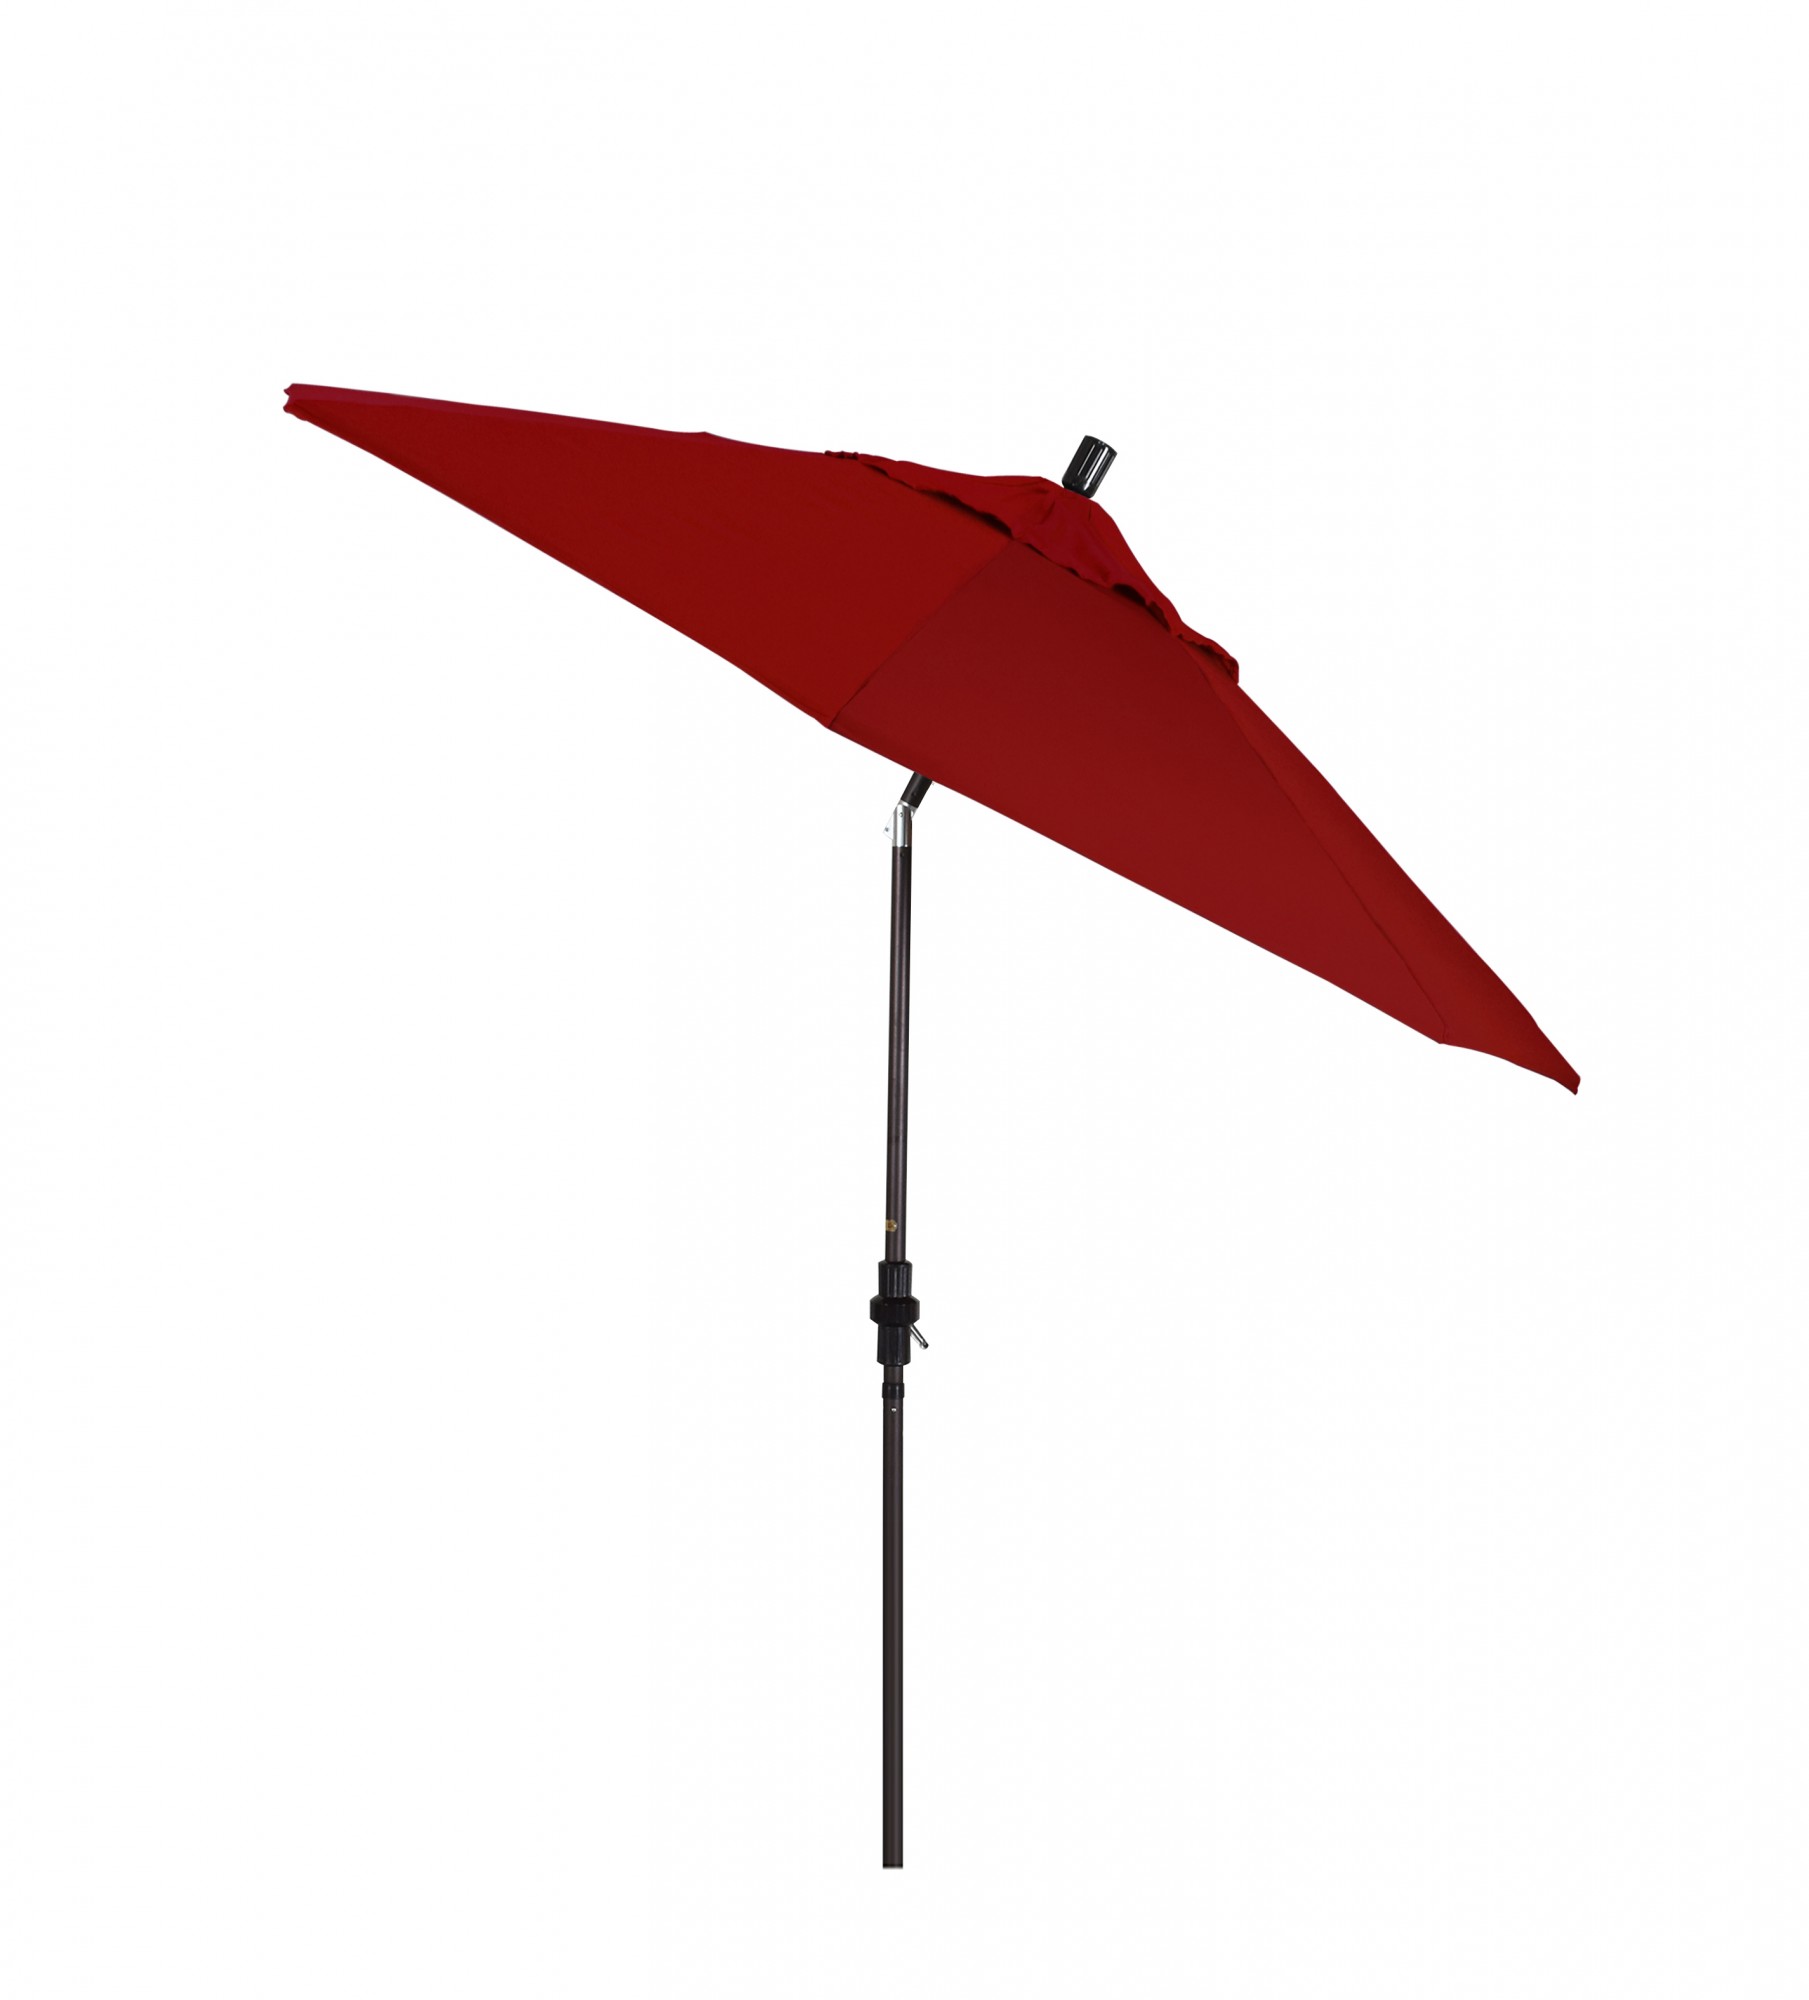 Outdoor Living and Style 9ft Outdoor Sun Master Series Patio Umbrella With Crank Lift and Collar Tilt System, Red